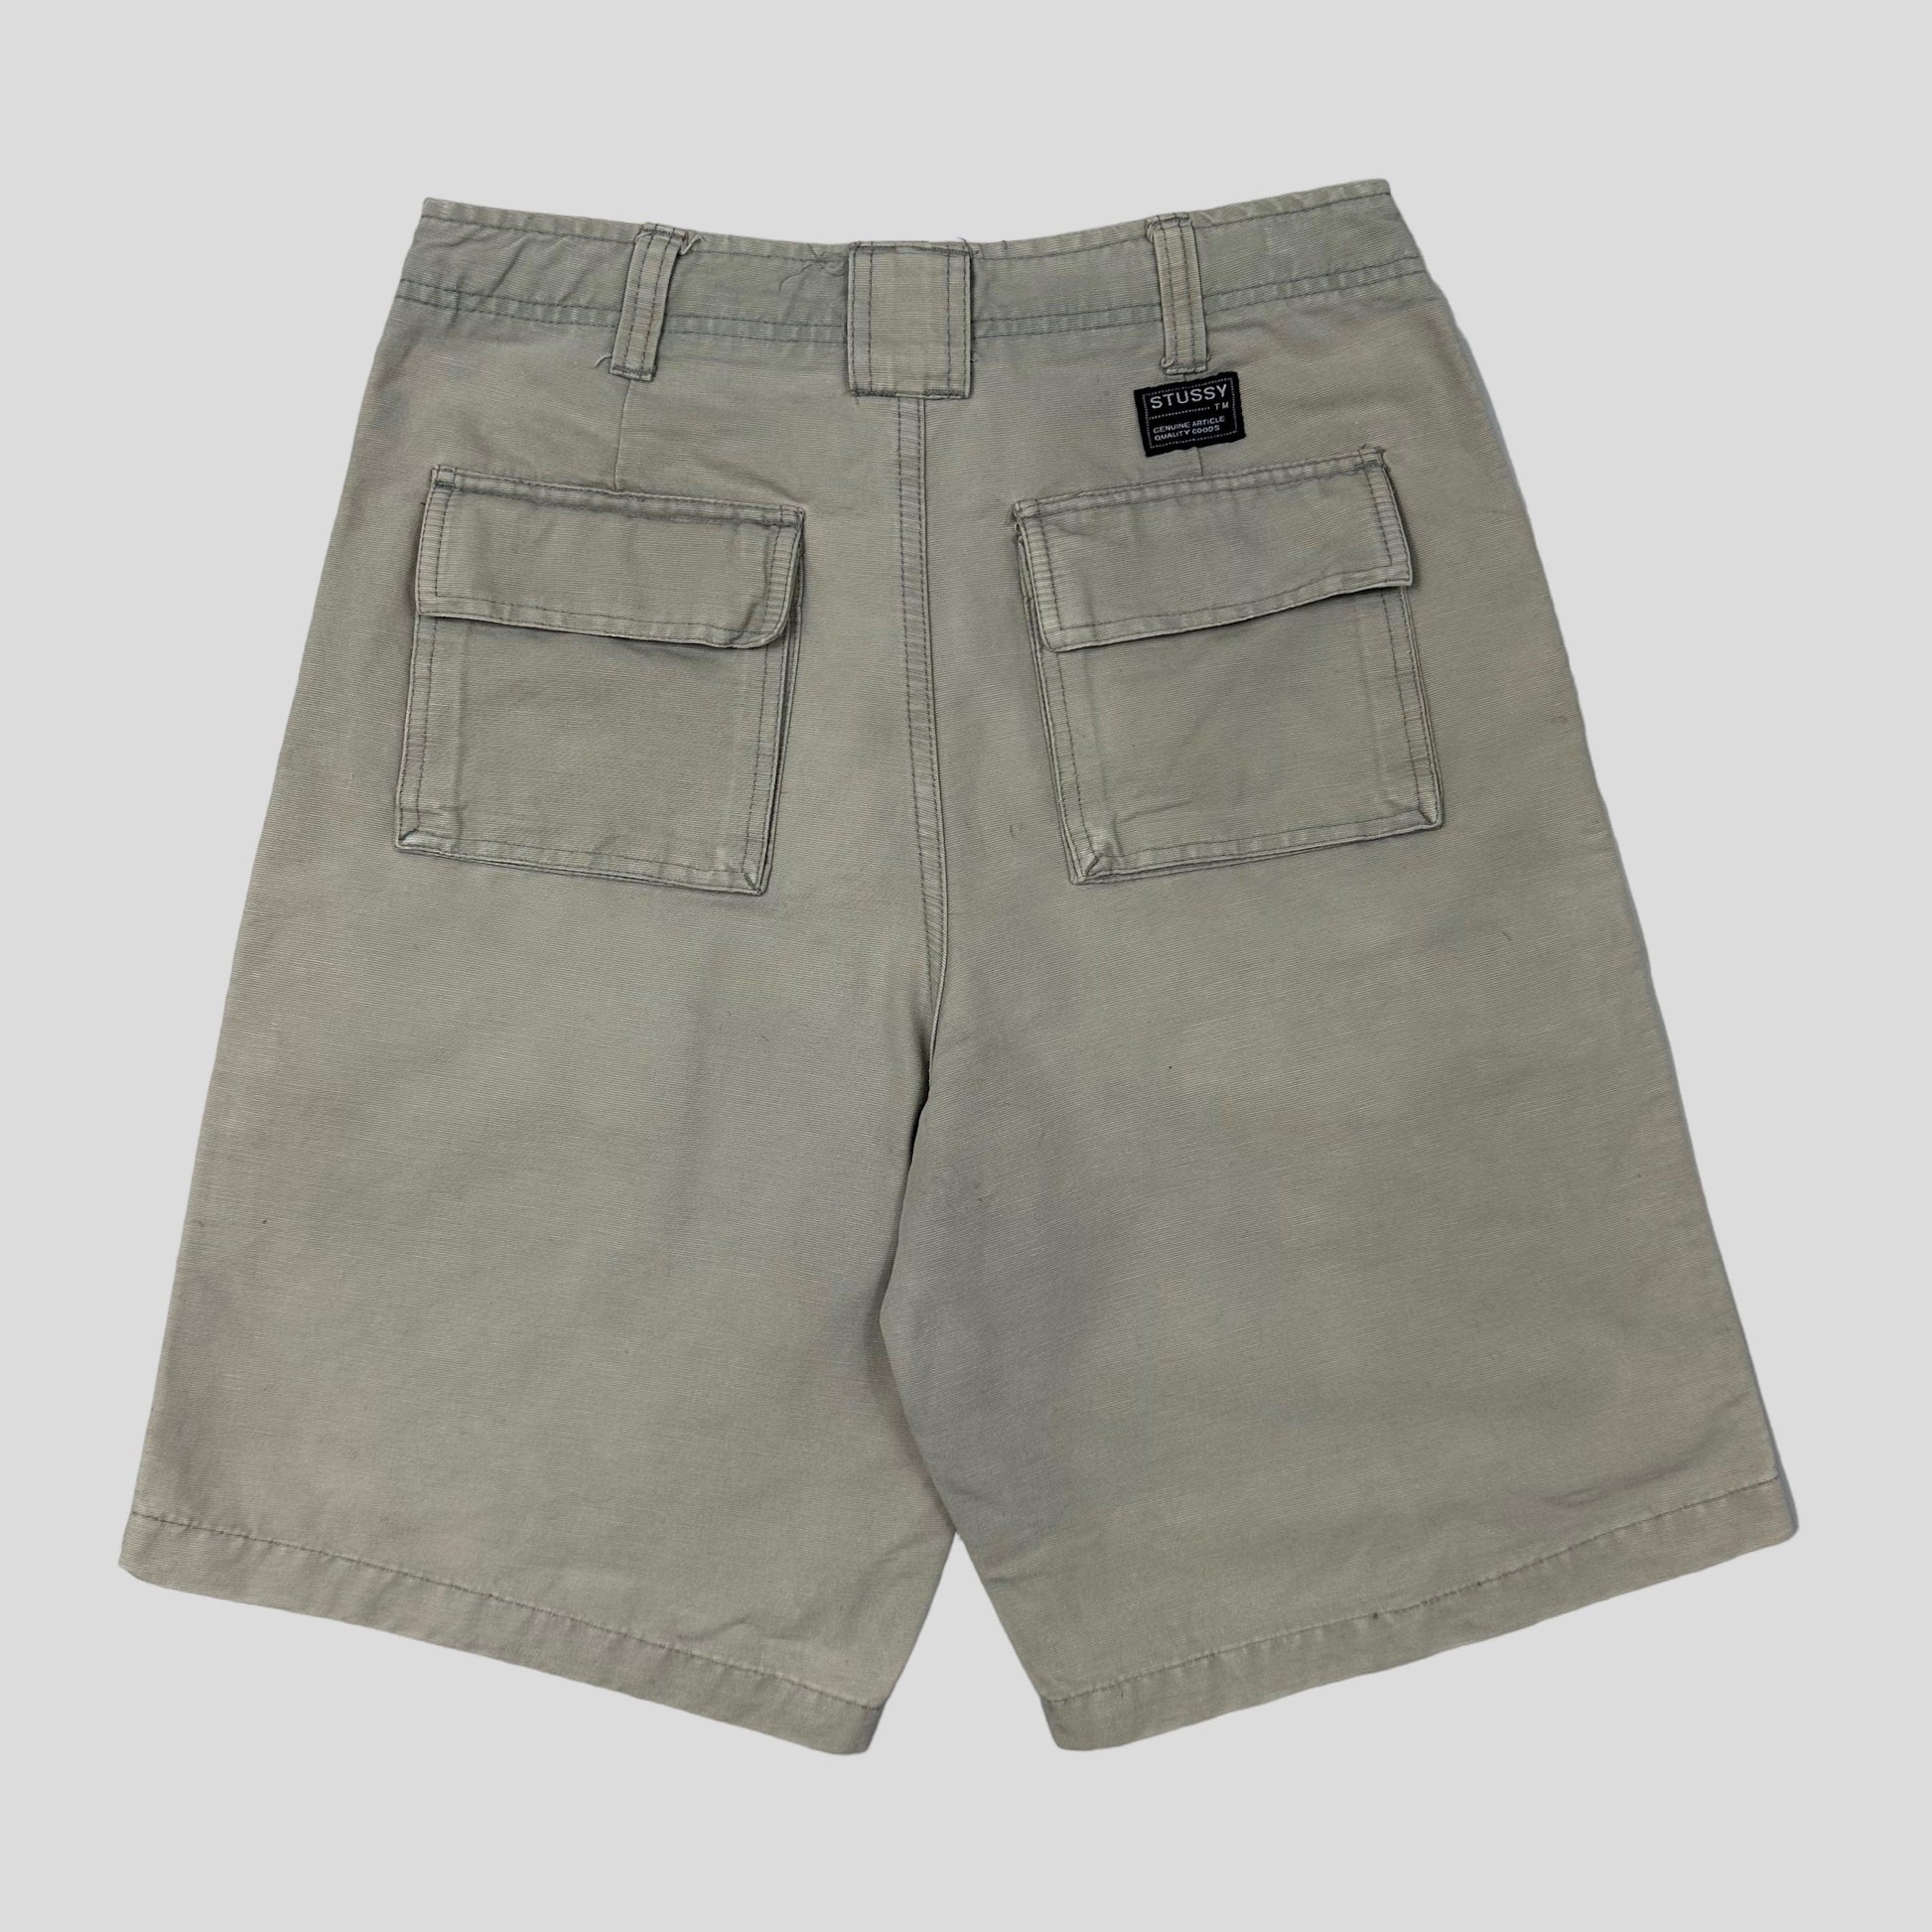 Stussy 90’s BDU Multipocket Fatigue Shorts - 30 - Known Source